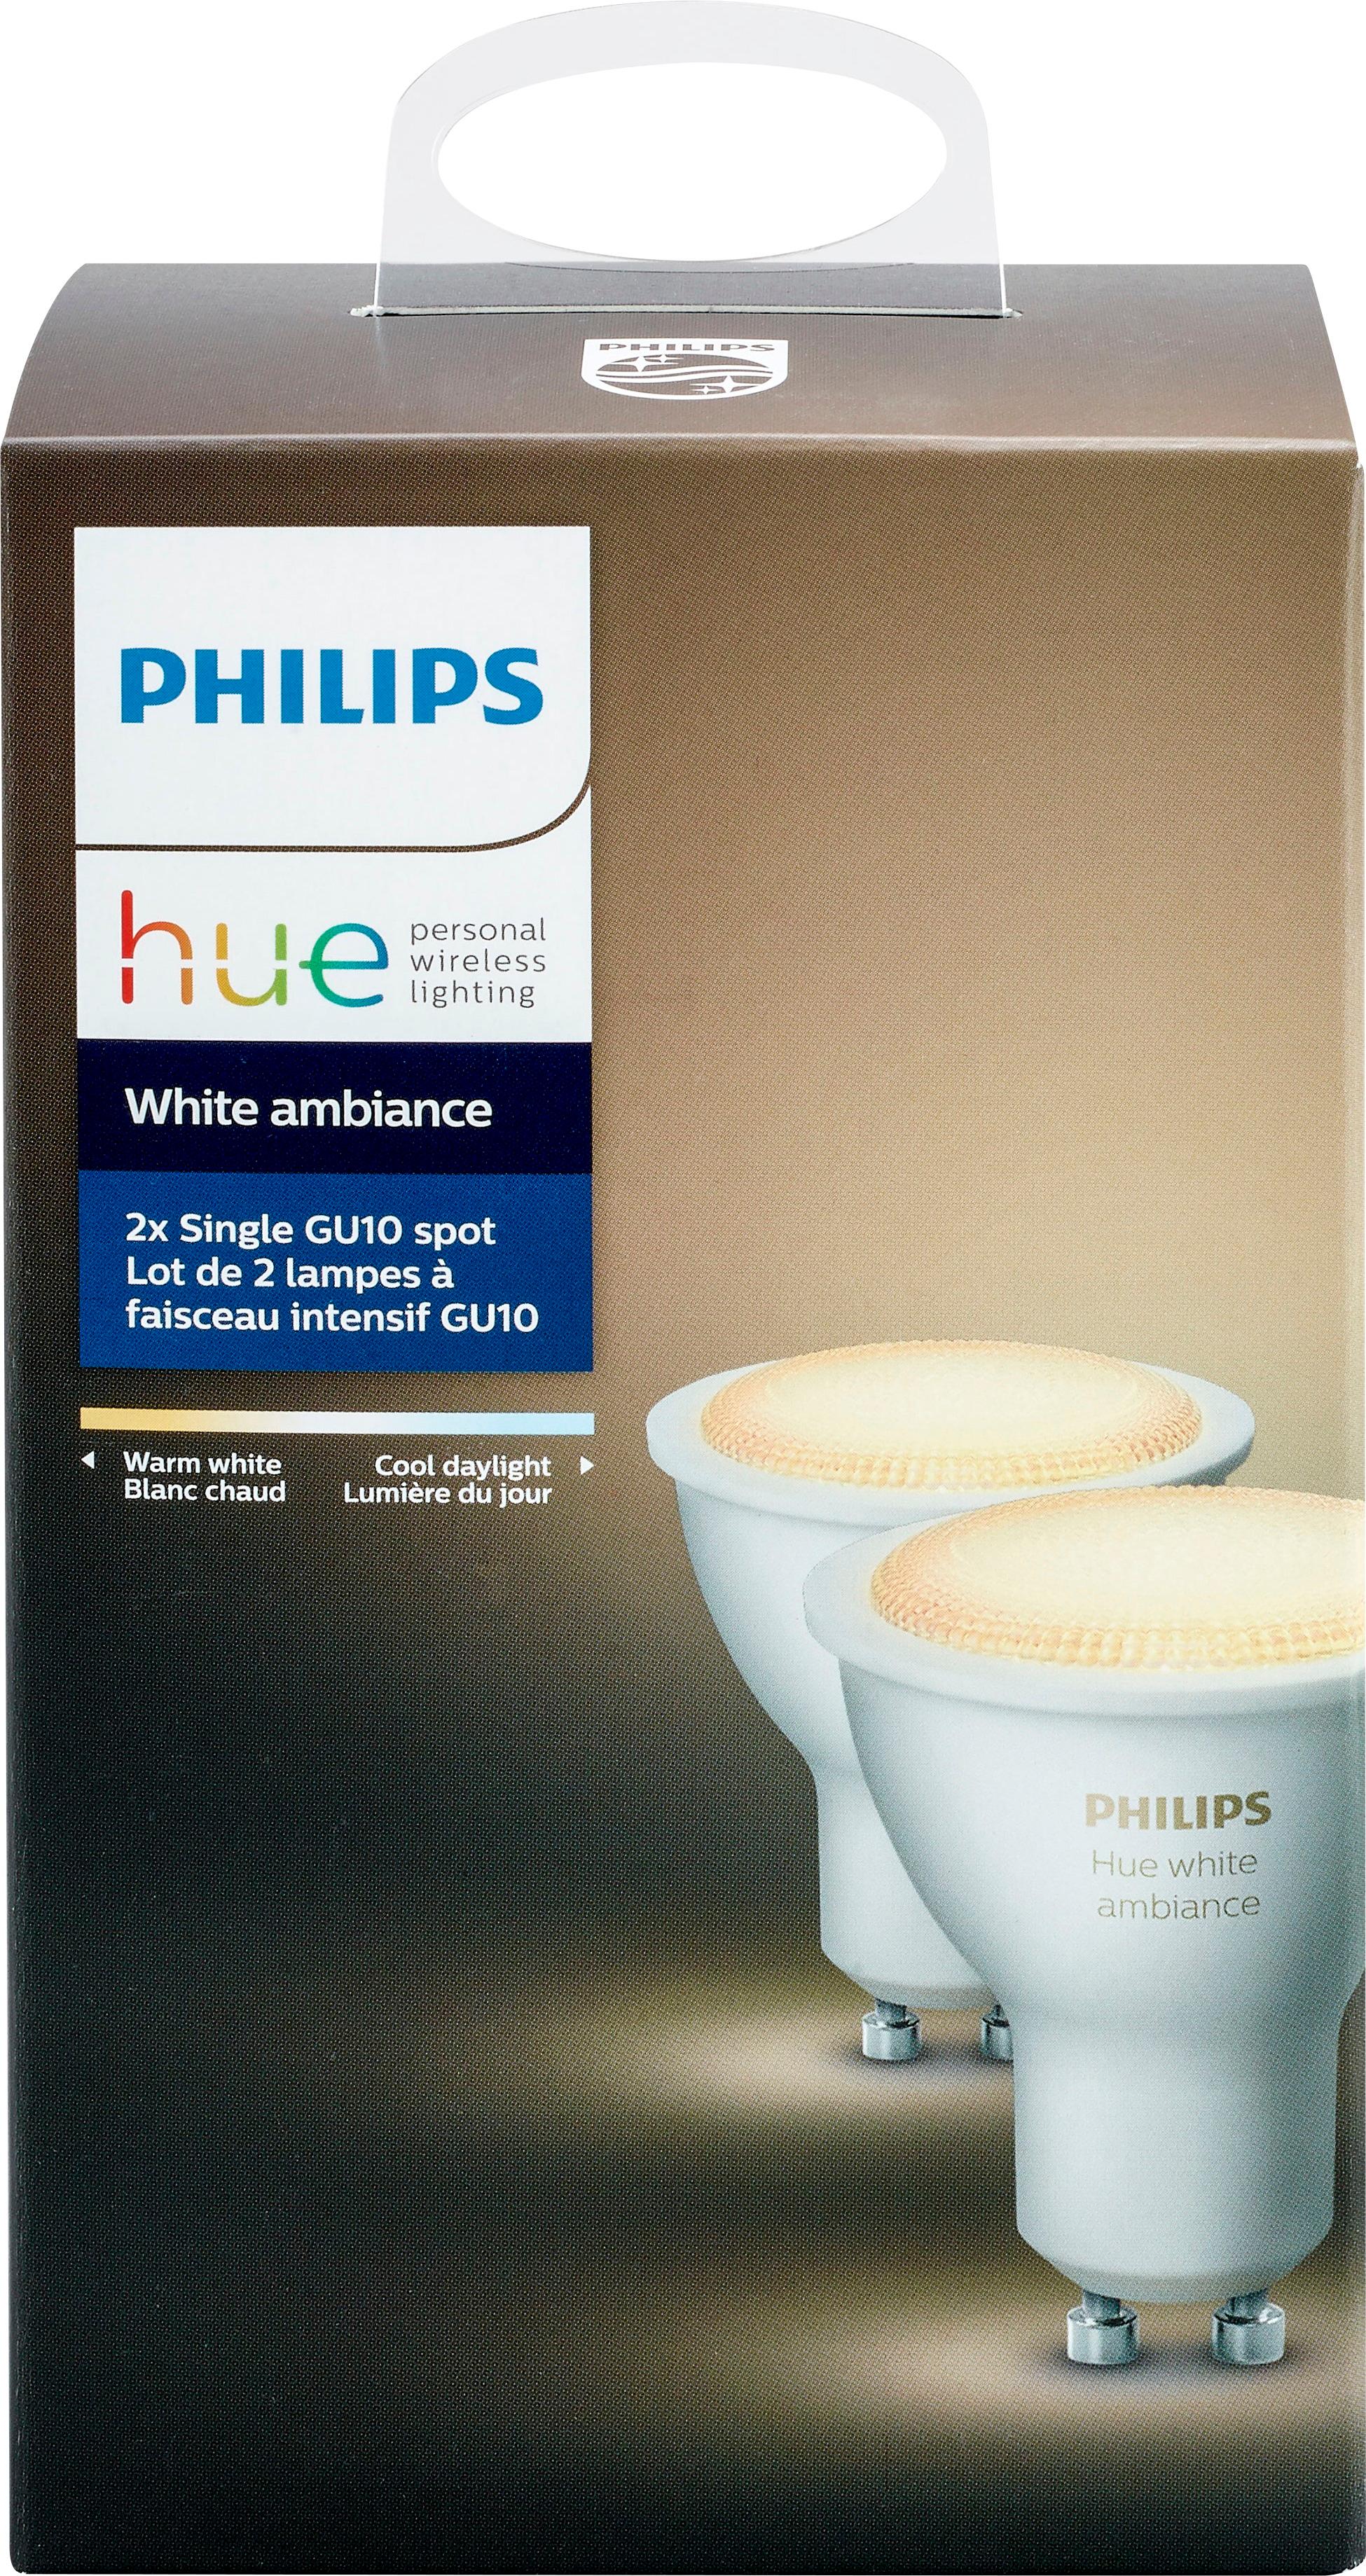 Made of jungle Pegs Best Buy: Philips Hue White Ambiance 5.5W LED Light Bulb (2-Pack) White  466490